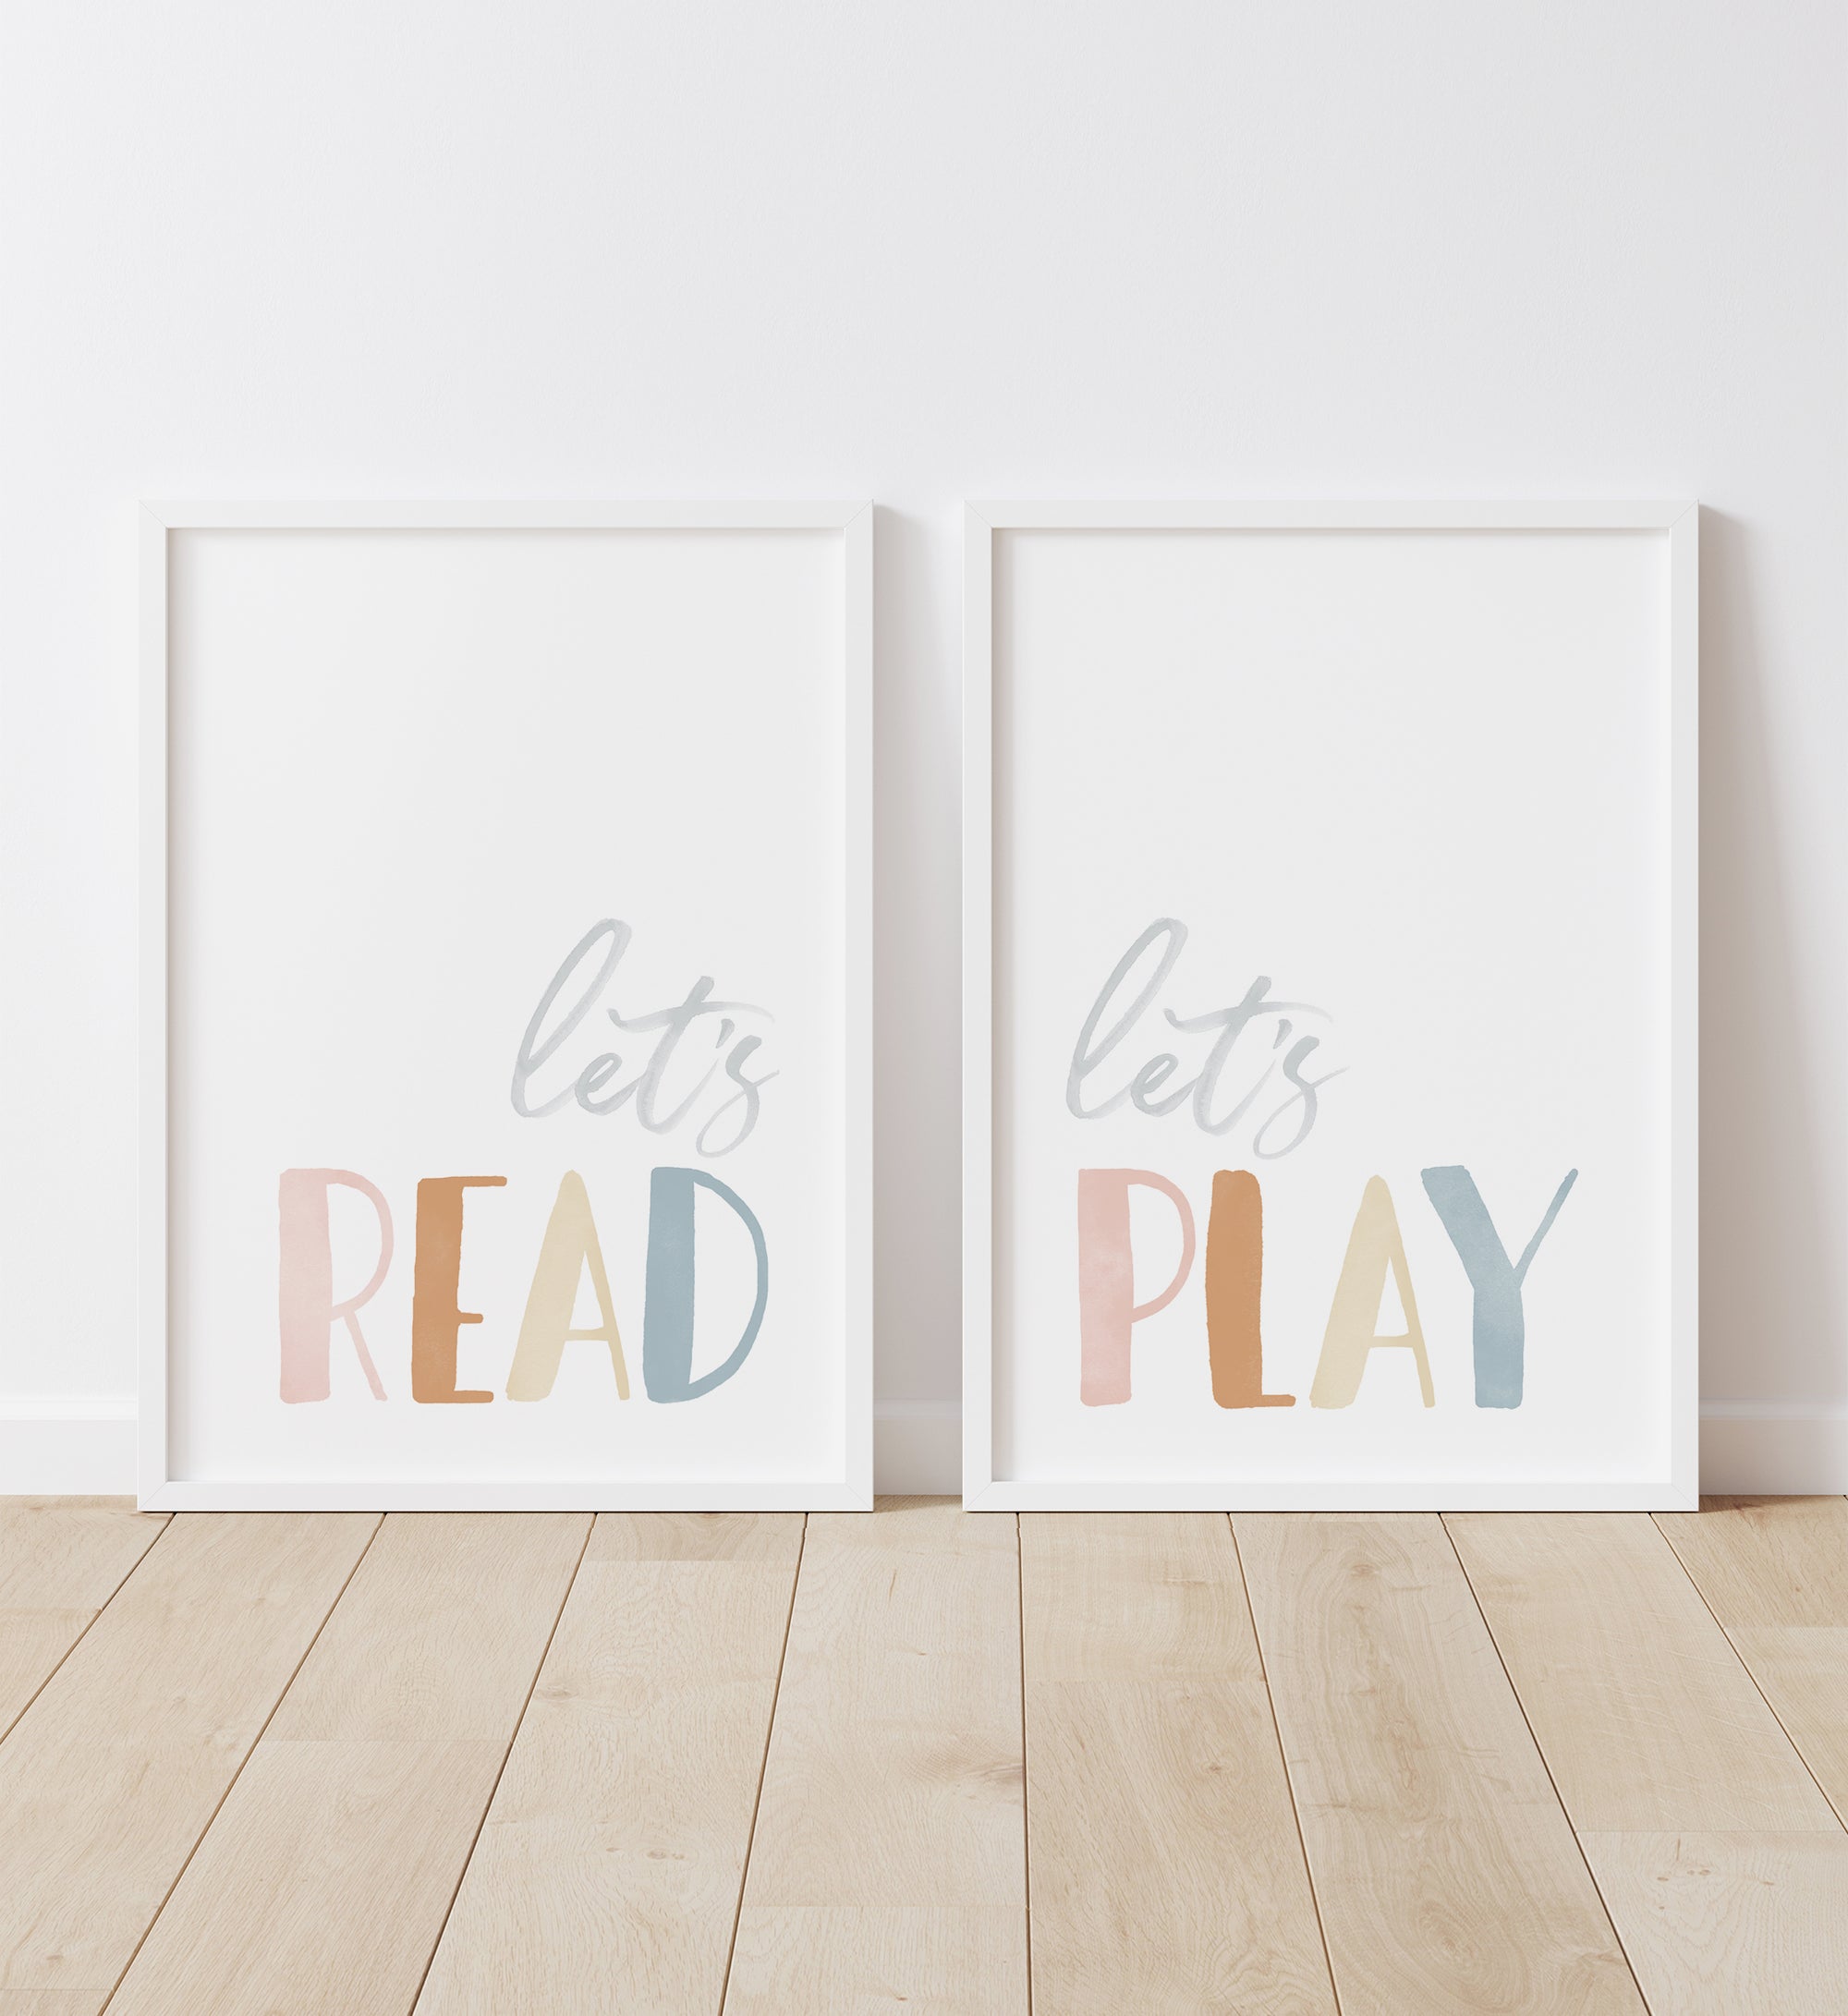 Let's Read, Let's Play Set of 2 Prints - BHCP